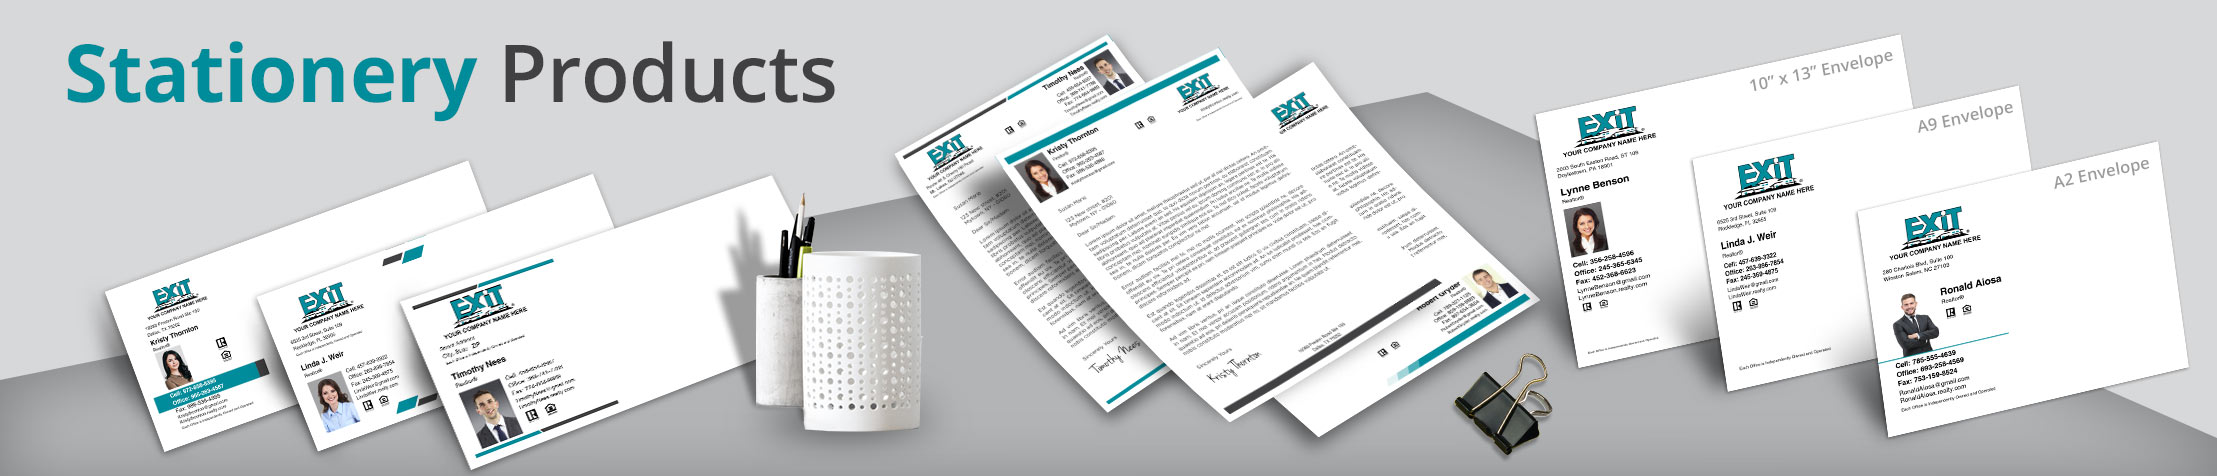 Exit Realty Real Estate Stationery Products - Custom Letterhead & Envelopes Stationery Products for Realtors | BestPrintBuy.com